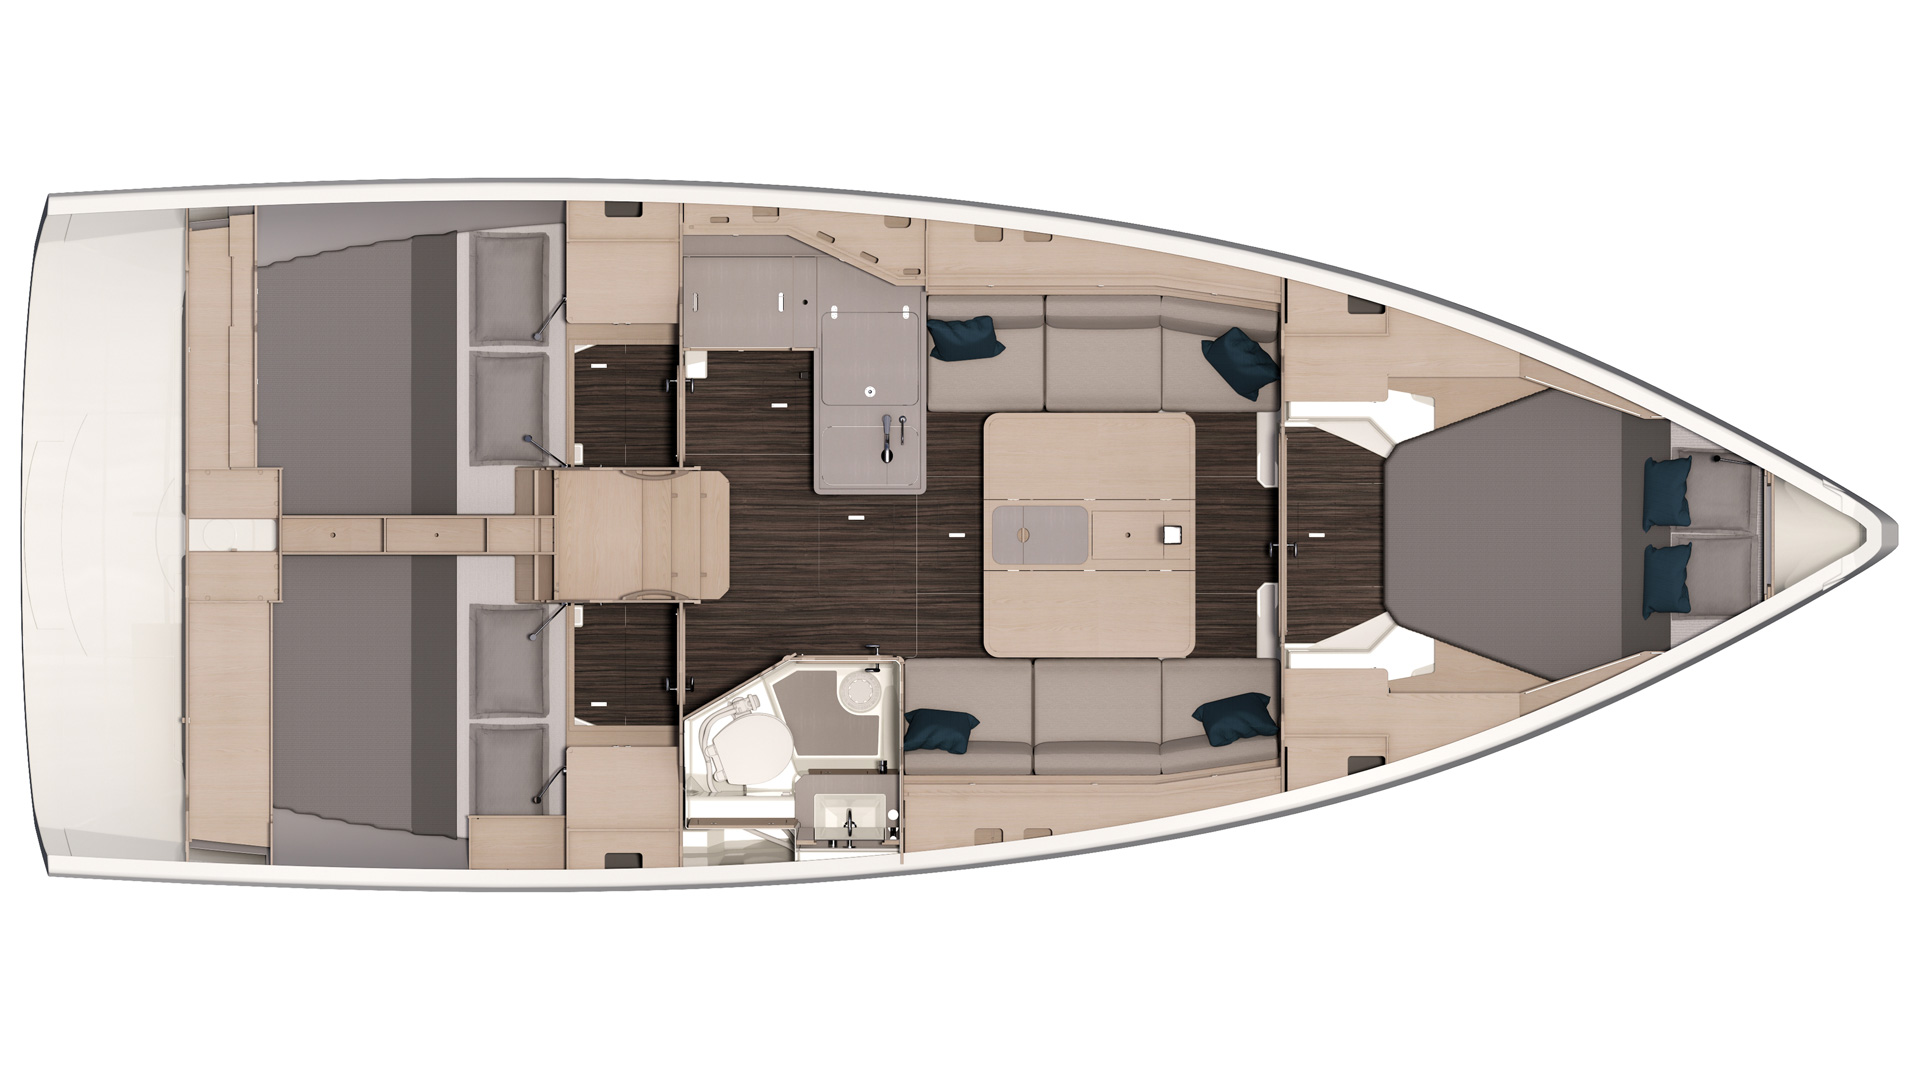 DUFOUR 37 3 cabins layout